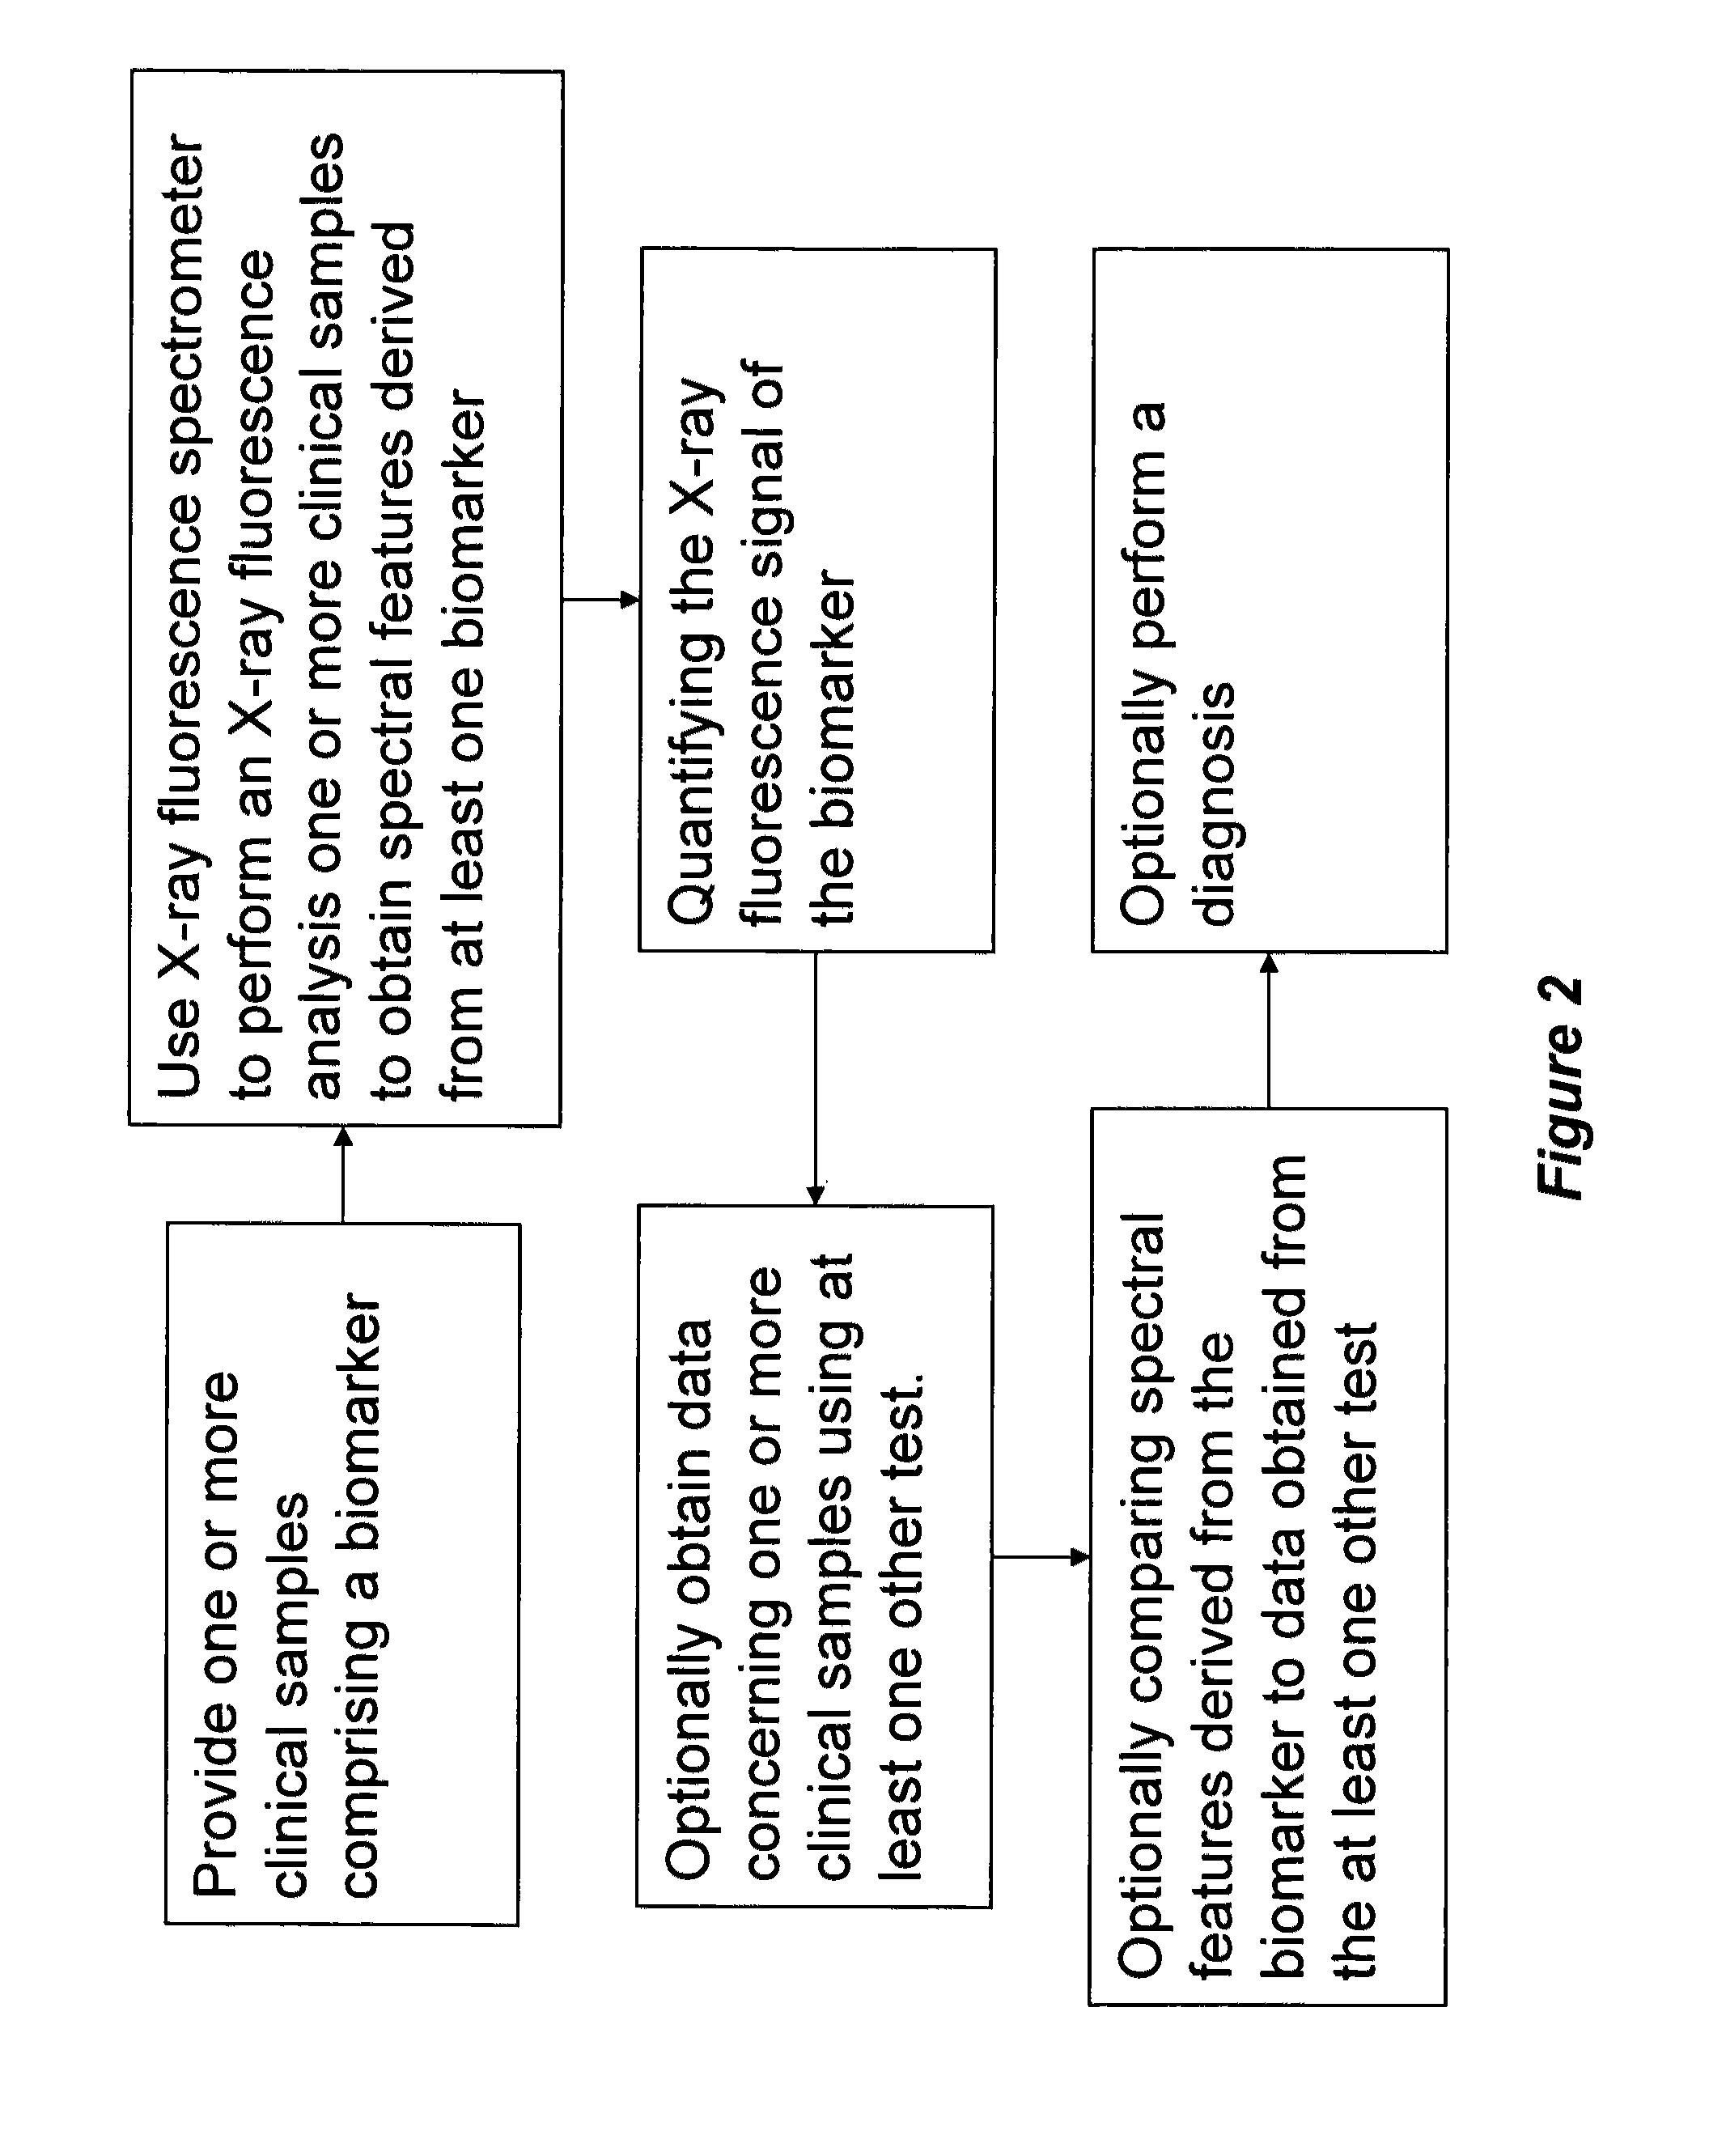 Method for analysis using x-ray fluorescence